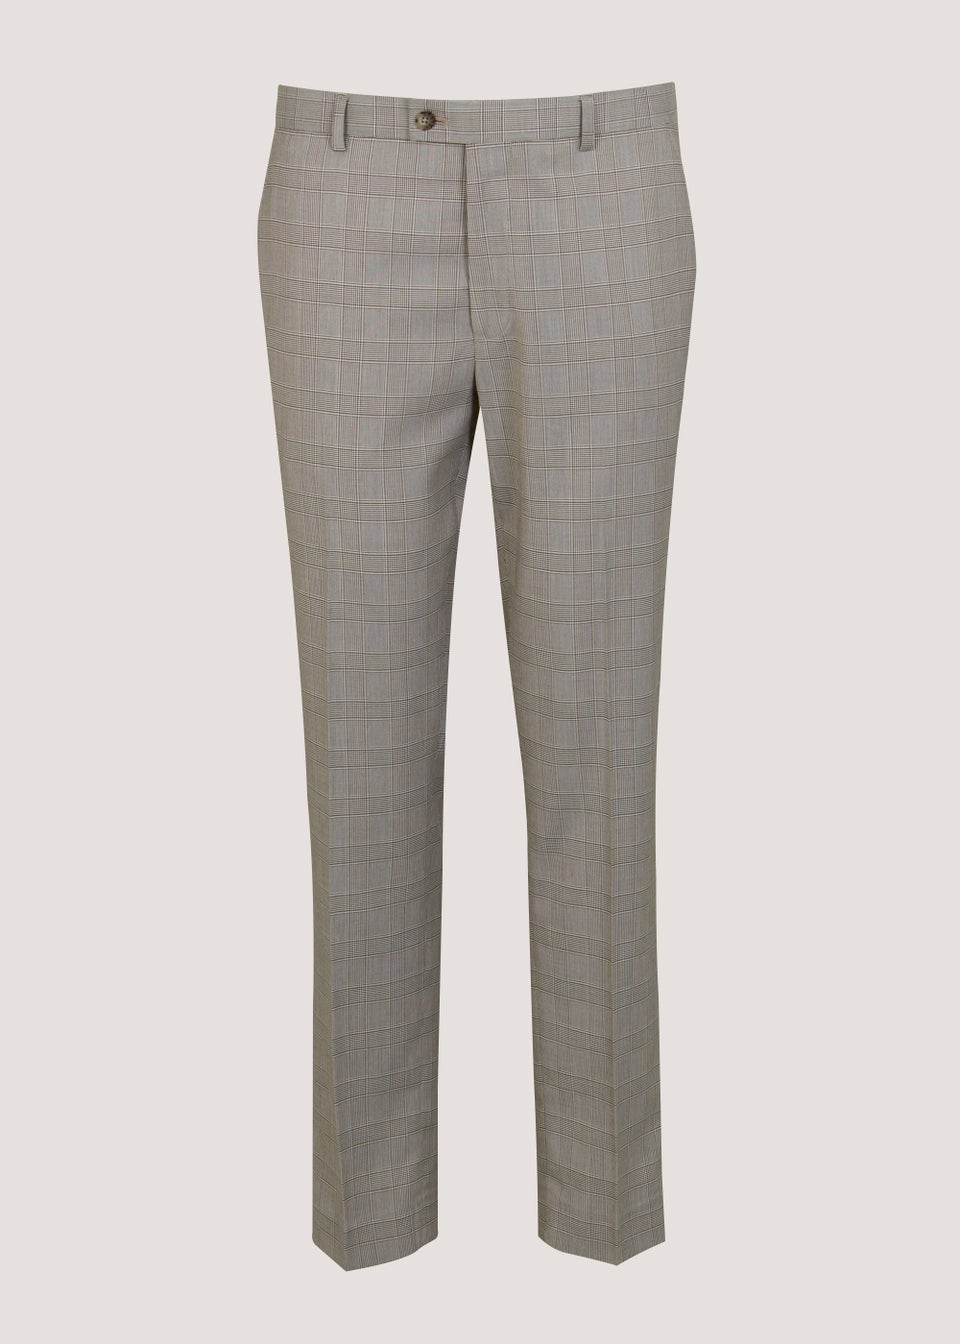 Taylor & Wright Gibson Brown Slim Fit Suit Trousers